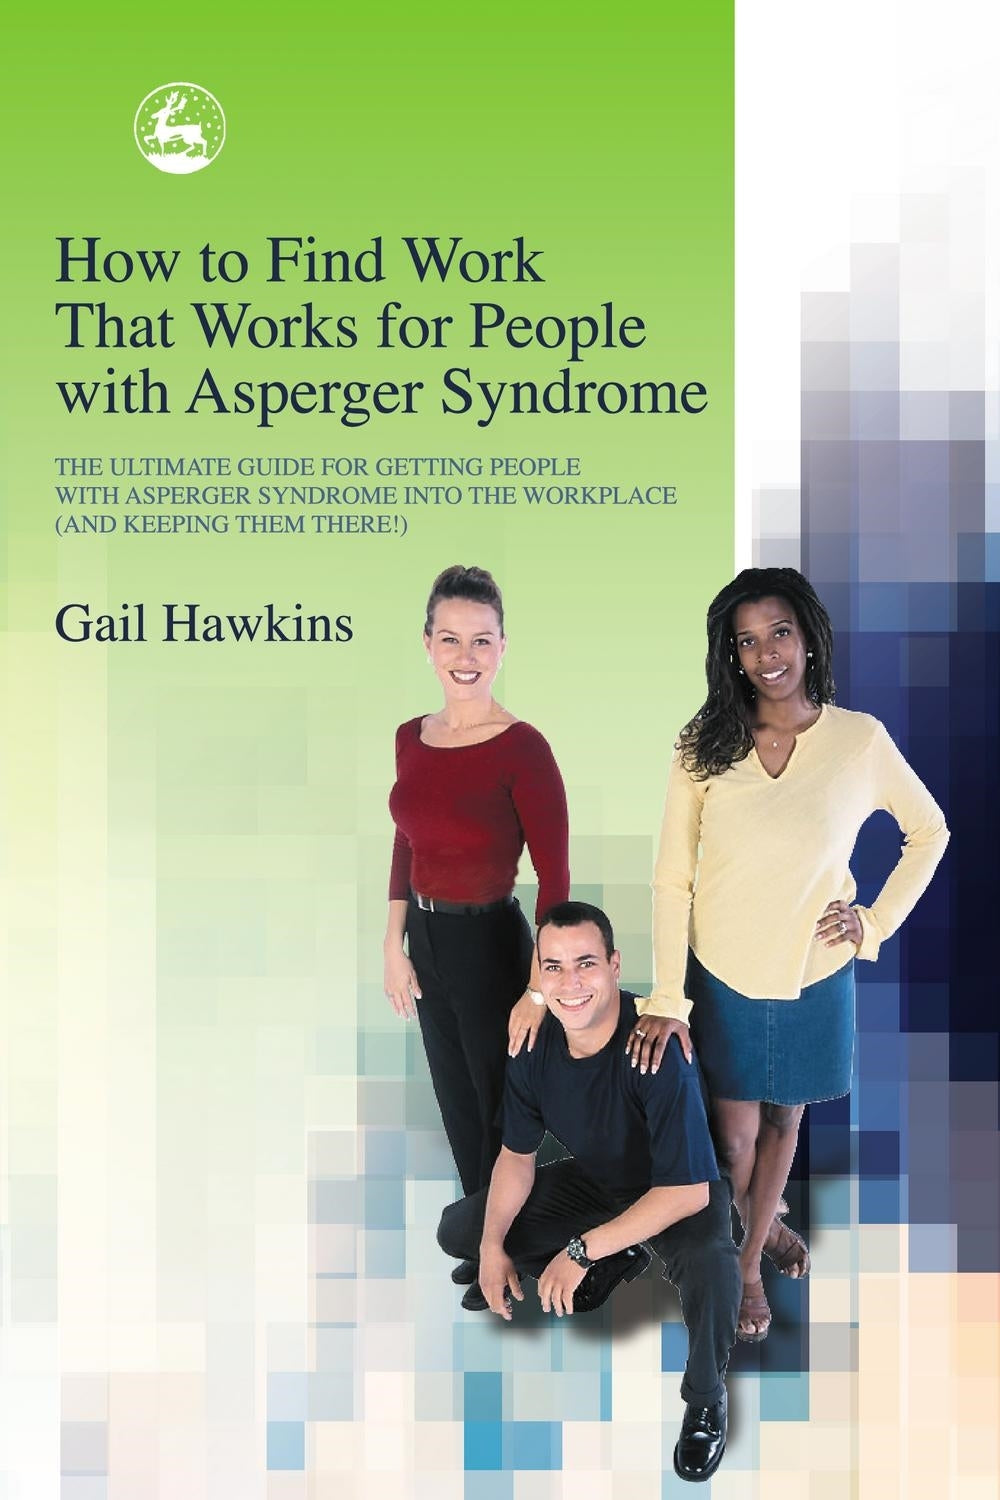 How to Find Work that Works for People with Asperger Syndrome by Gail Hawkins